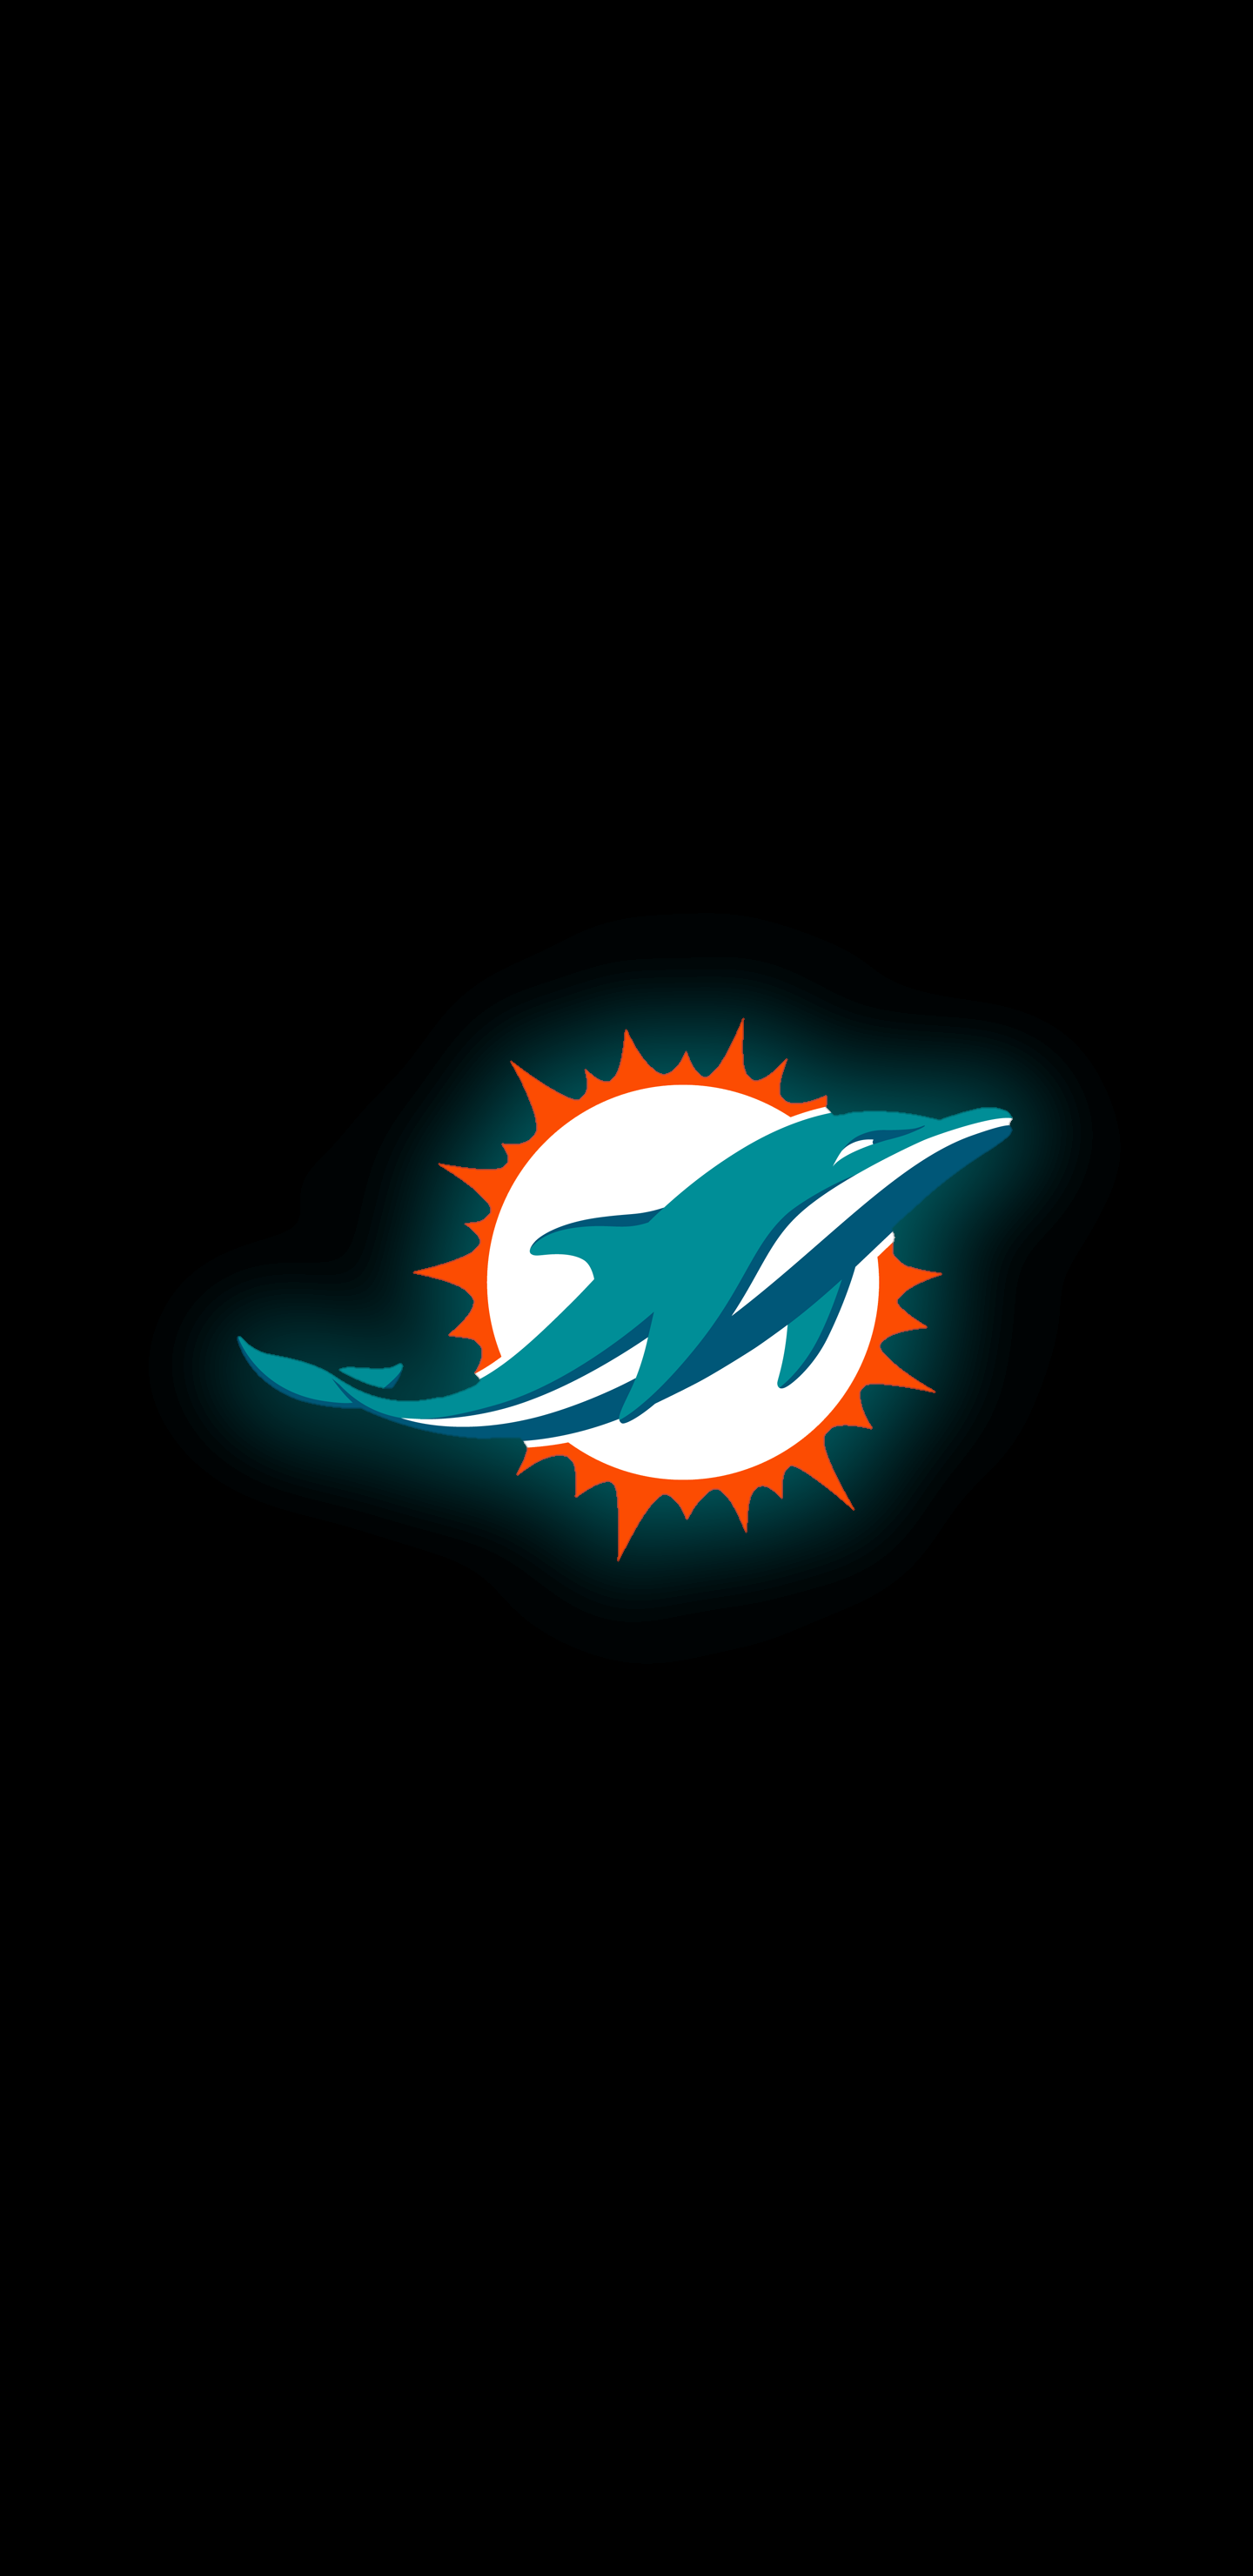 I'm making a amoled wallpaper for every NFL team! 14 down